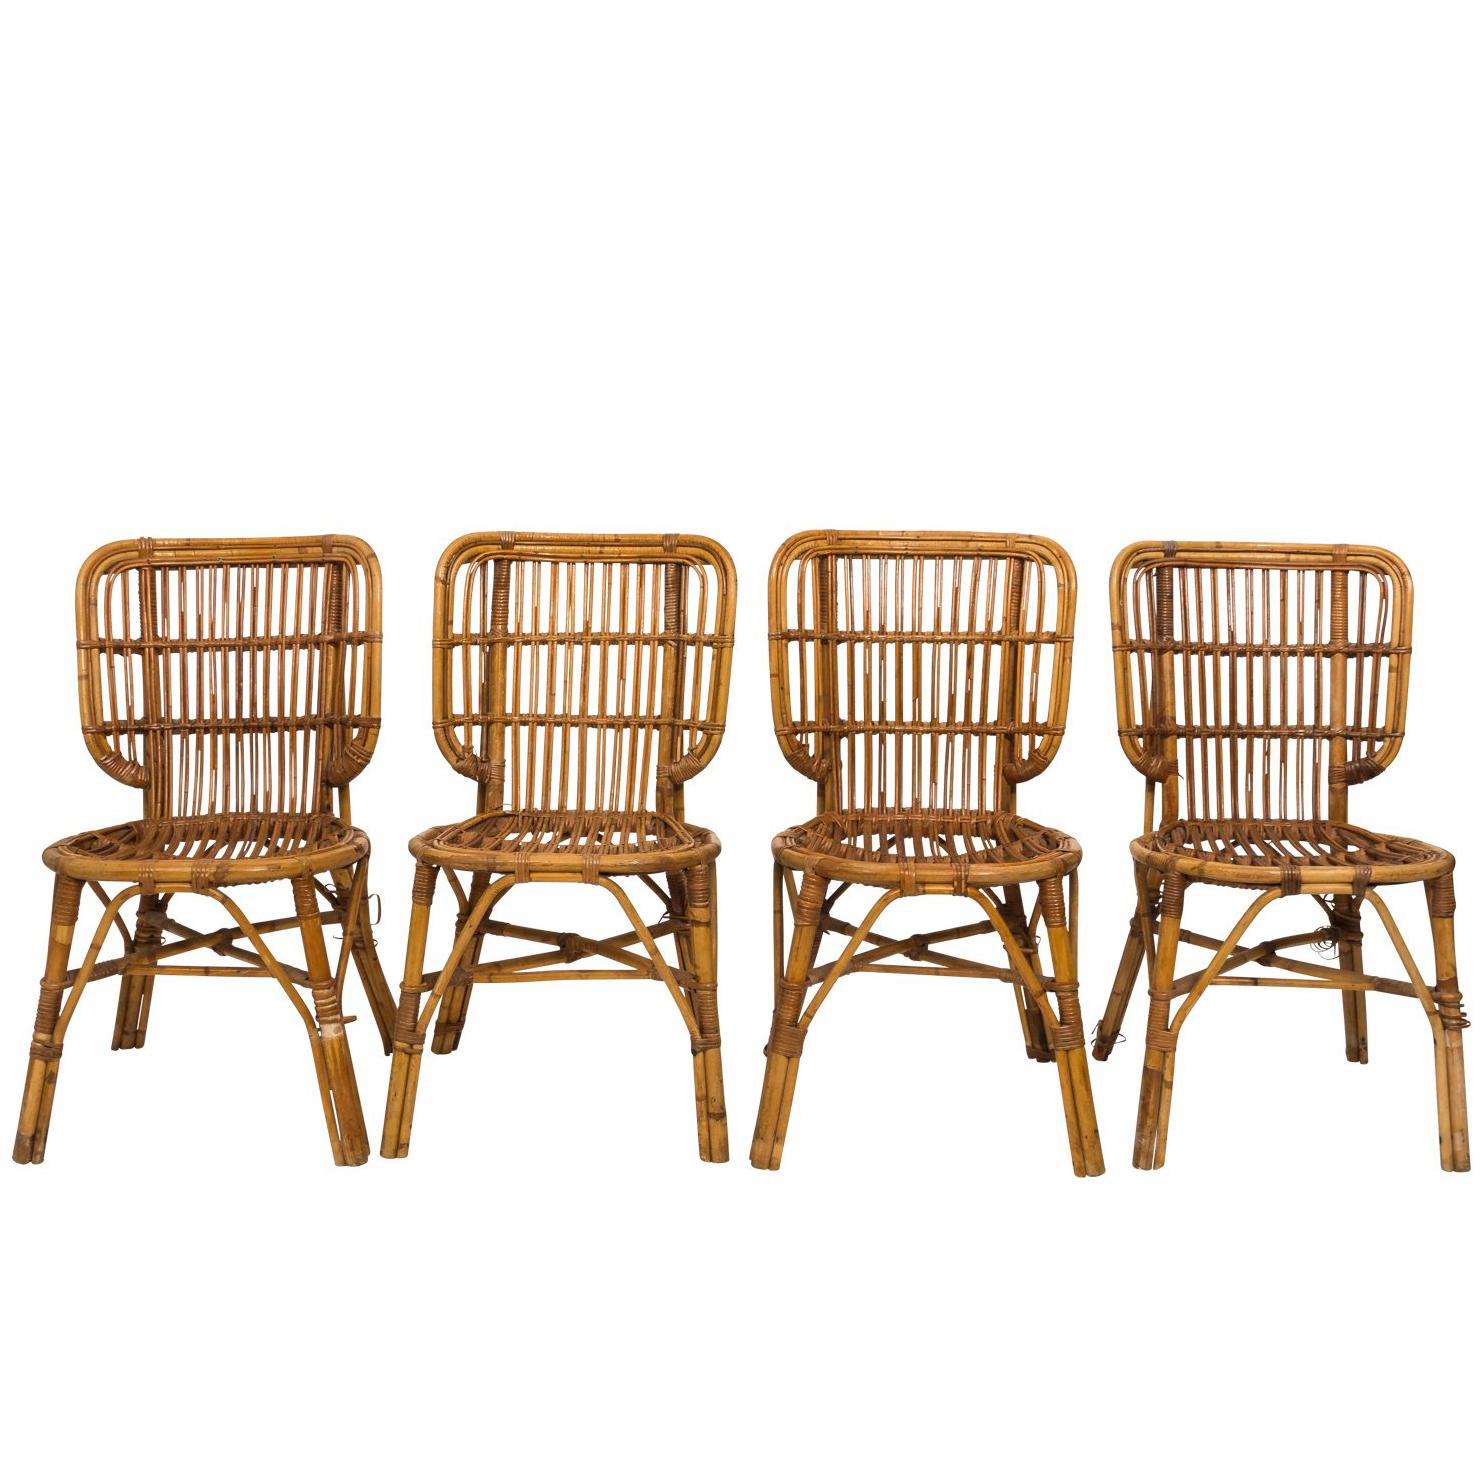 Set of Rattan Side Chairs, circa 1940s